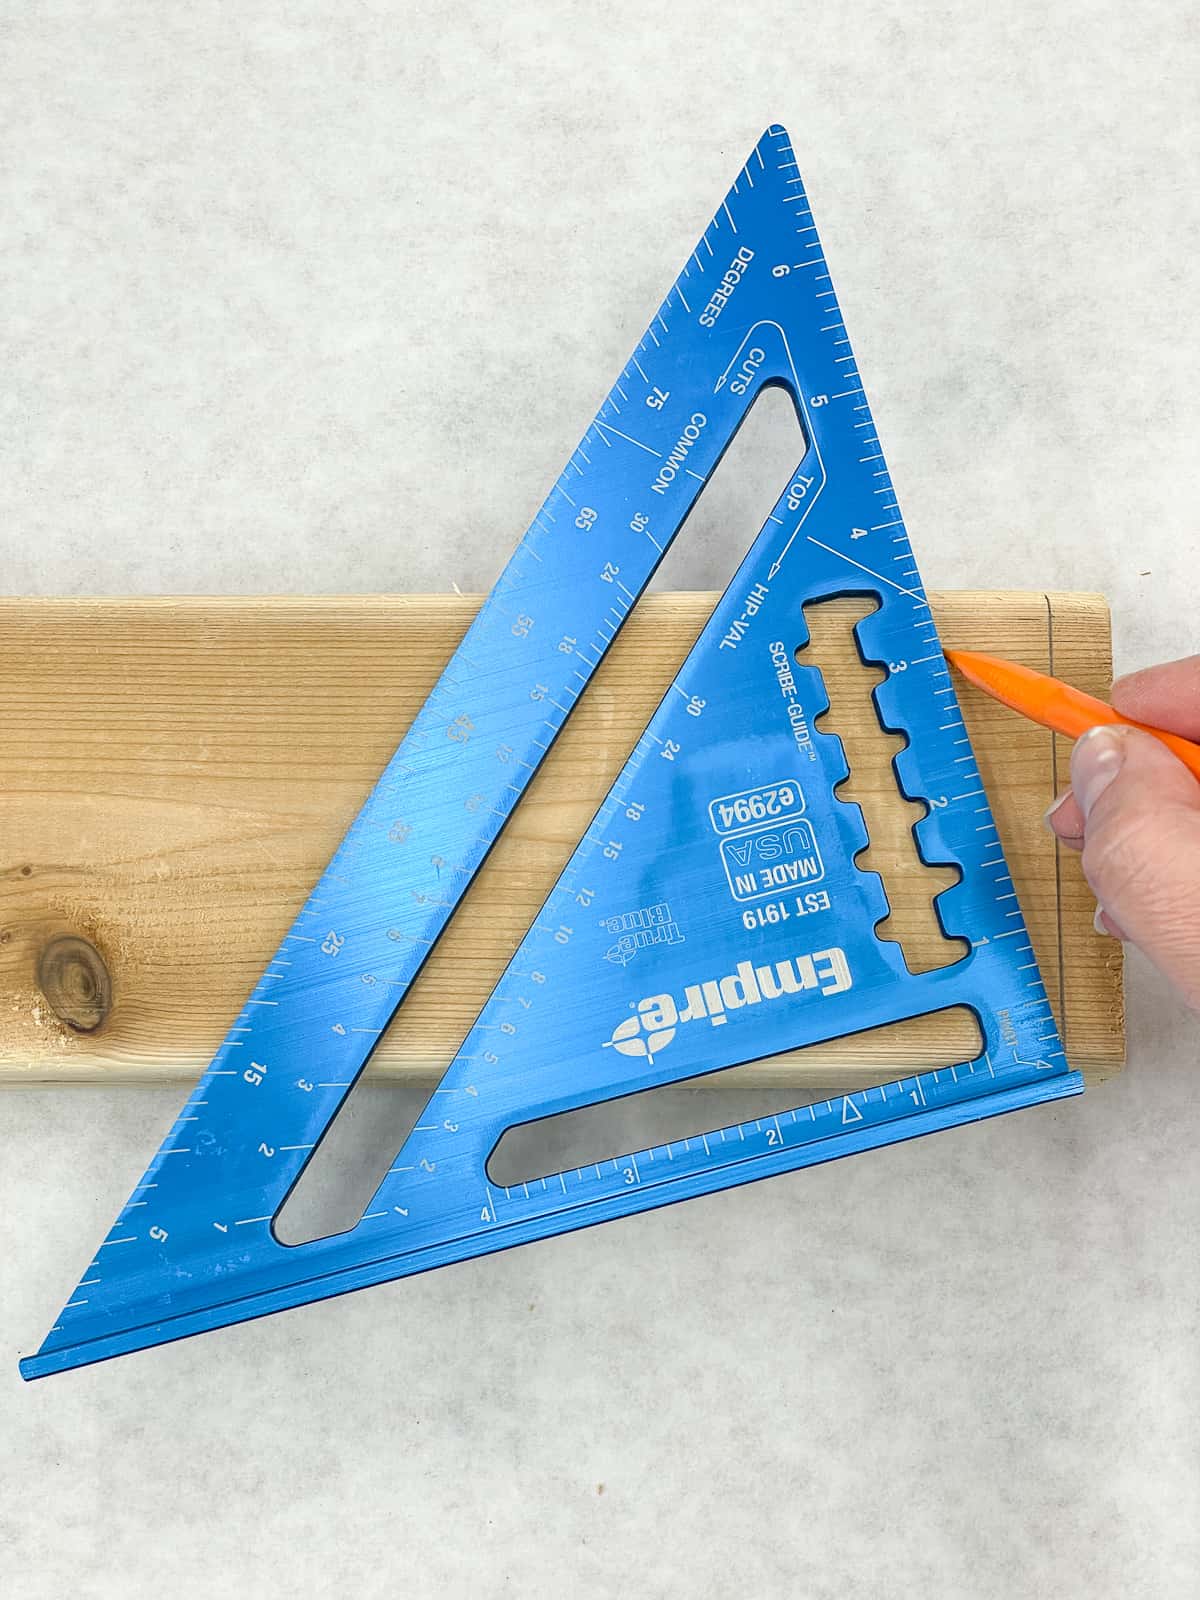 marking a 15 degree angle on a 2x4 board with a speed square